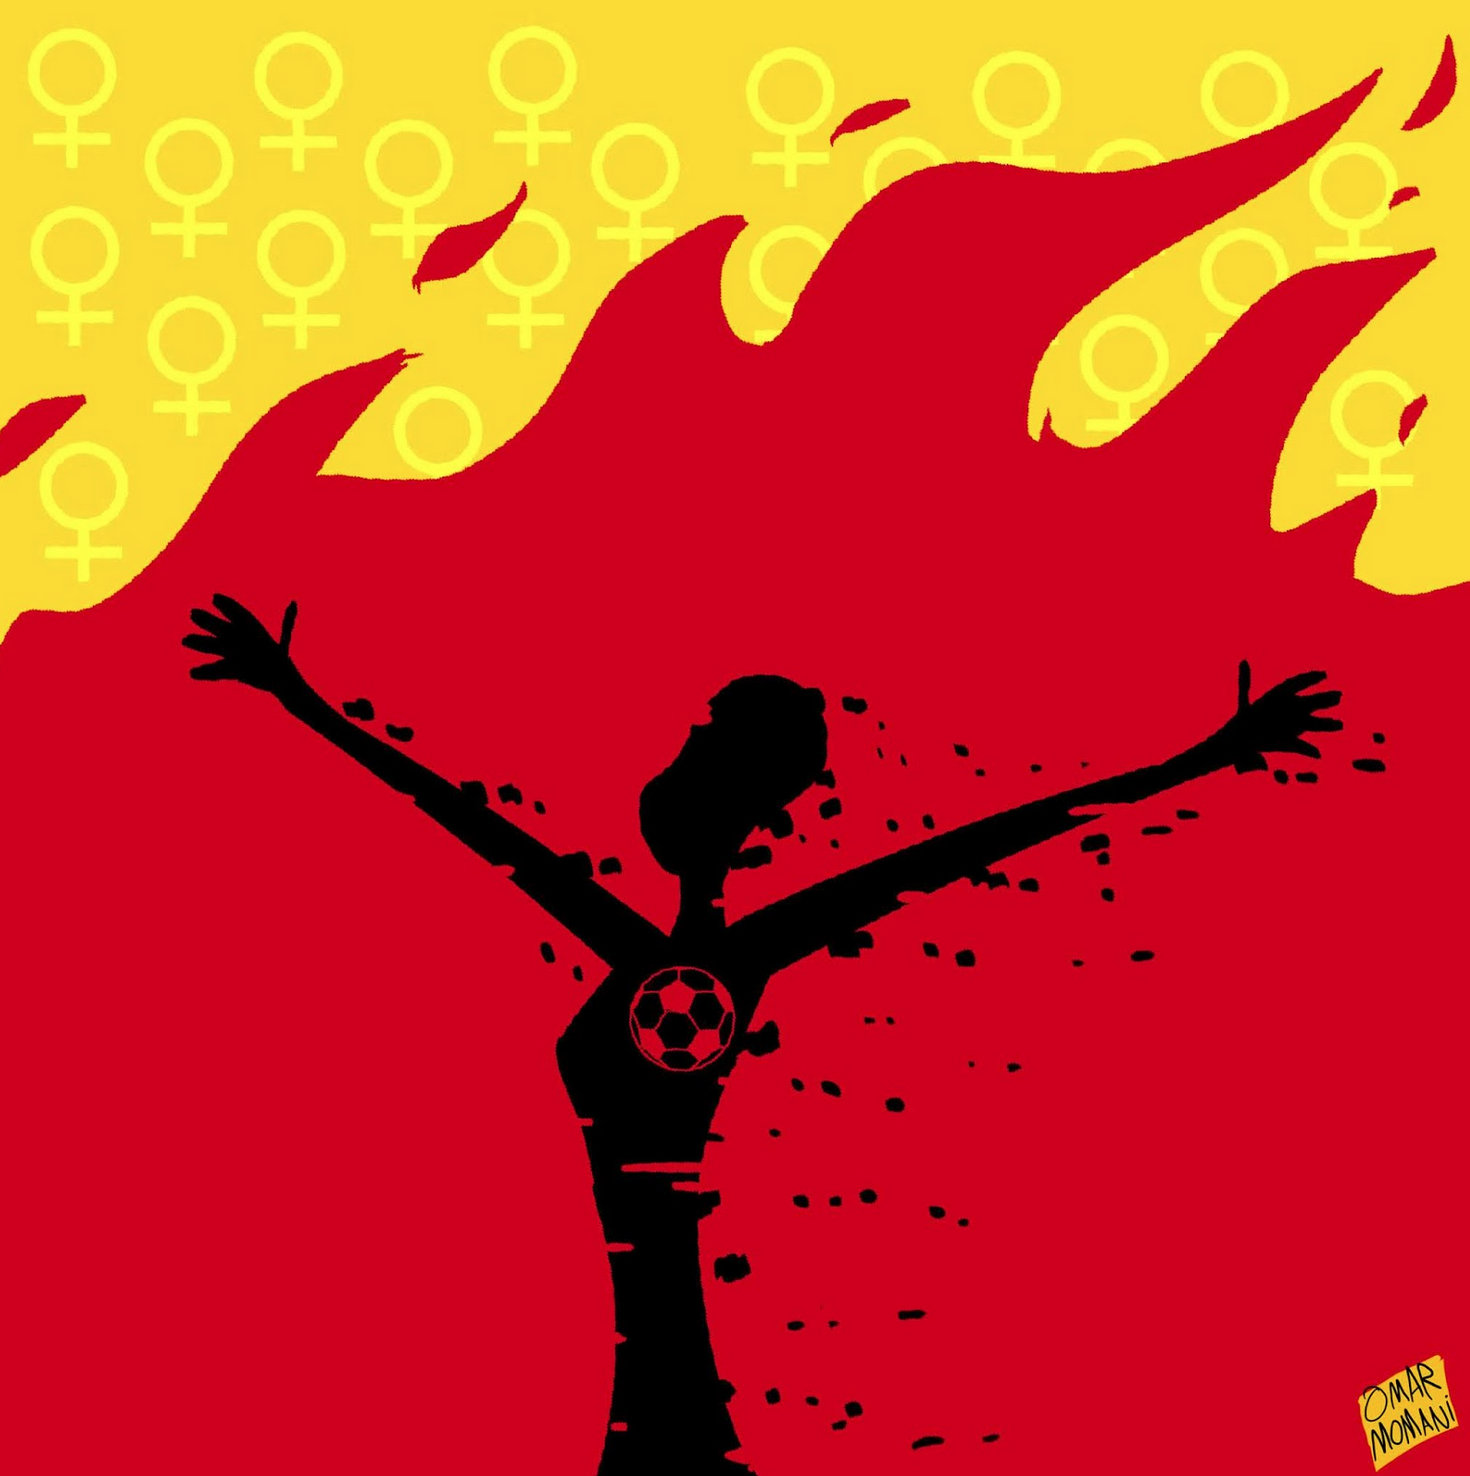 A black silhouette with a soccer ball over the chest over red flames and a yellow background with the female gender symbol